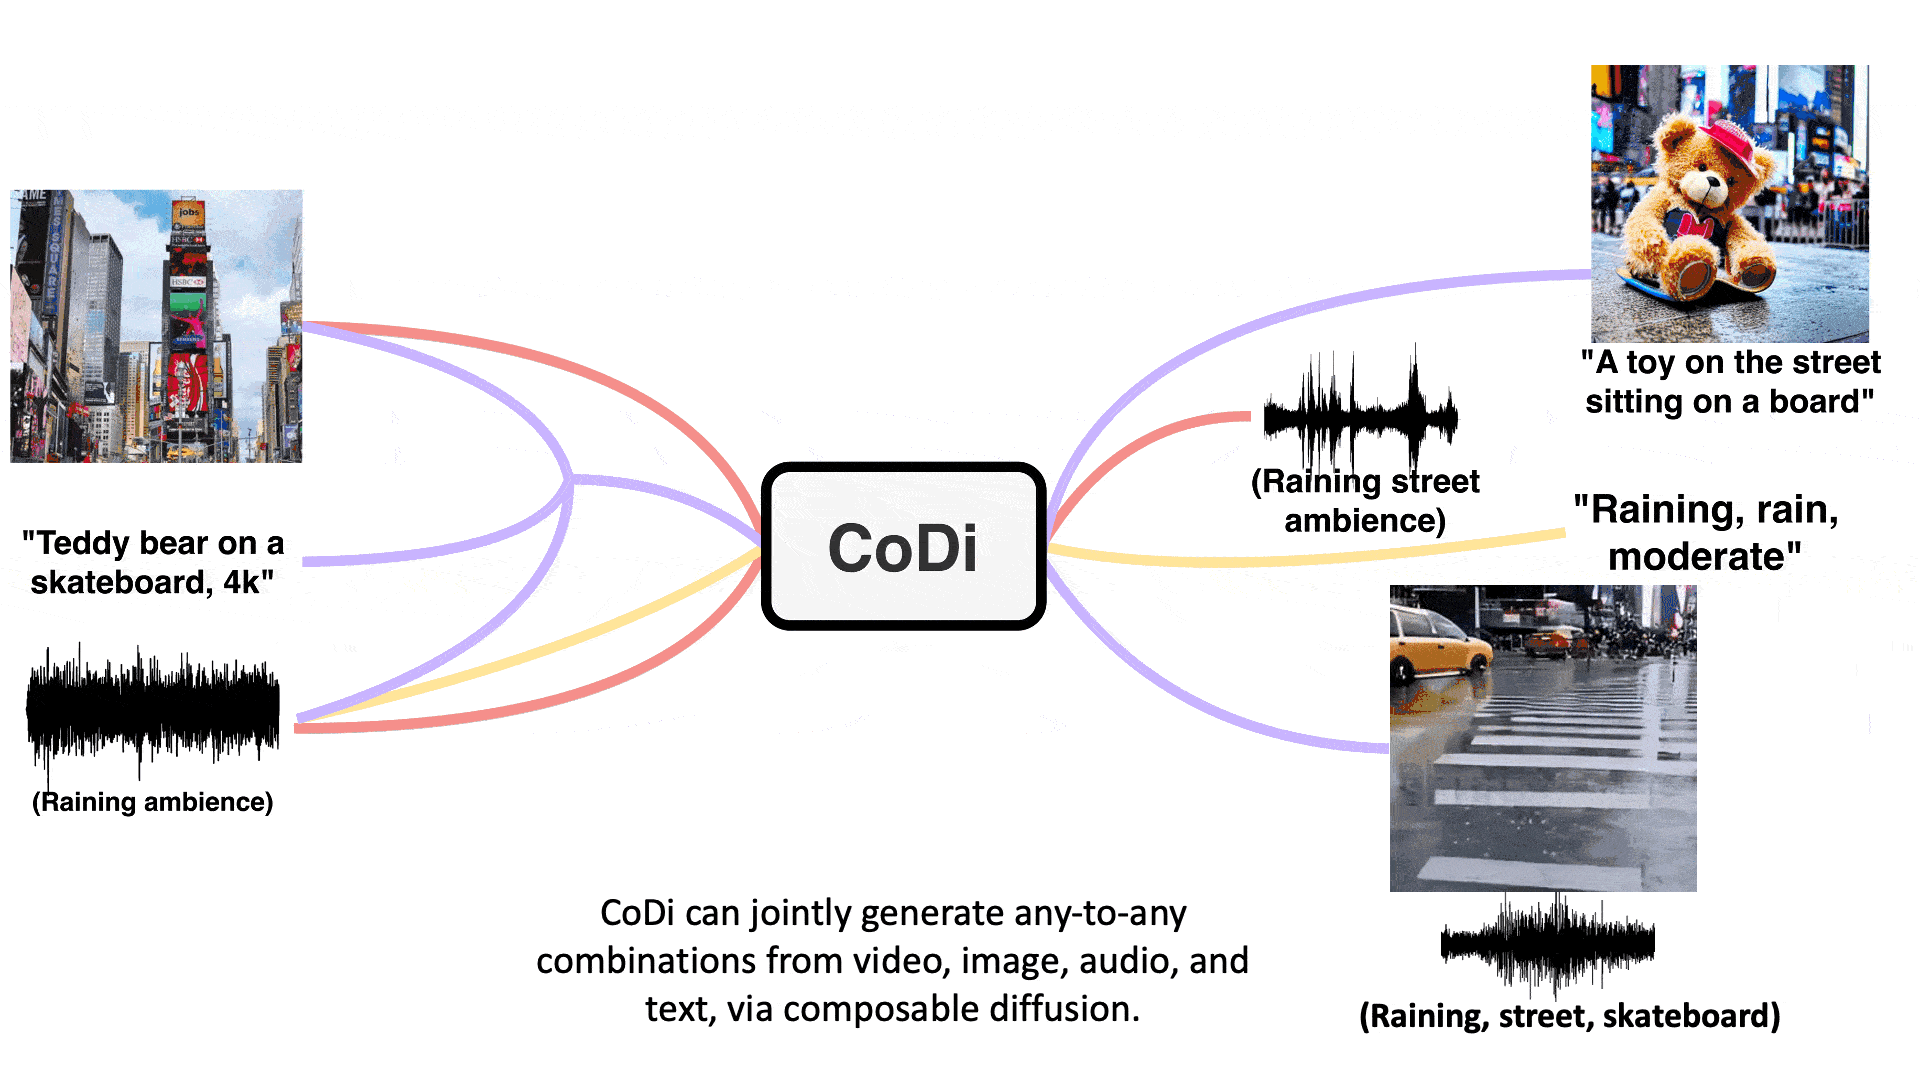 A GIF of CoDi generation pipelines. The input modalities are listed vertically on the left side, including the text “Teddy bear on a skateboard, 4k”, a picture of Times Square, and the waveform of raining ambience. Input modalities are input to the CoDi model, depicted by a rectangular block, and output modalities are listed on the right side. Input modalities, CoDi, and output modalities connected by lines of different colors to represent different generation pipelines. The yellow line depicts that given an input of rain audio, CoDi can generate the text description “Raining, rain, moderate”. Depicted by red lines, CoDi can take in the image of Times Square together with the rain audio, to generate the audio of raining street. Finally, depicted by purple lines, the input modalities are the text “Teddy bear on a skateboard, 4k”, the picture of Times Square, and the raining audio; the output is a video with sound. In the video, a Teddy bear is skateboarding in the rain on the street of Times Square, and one can hear synchronized sound of skateboarding and rain.